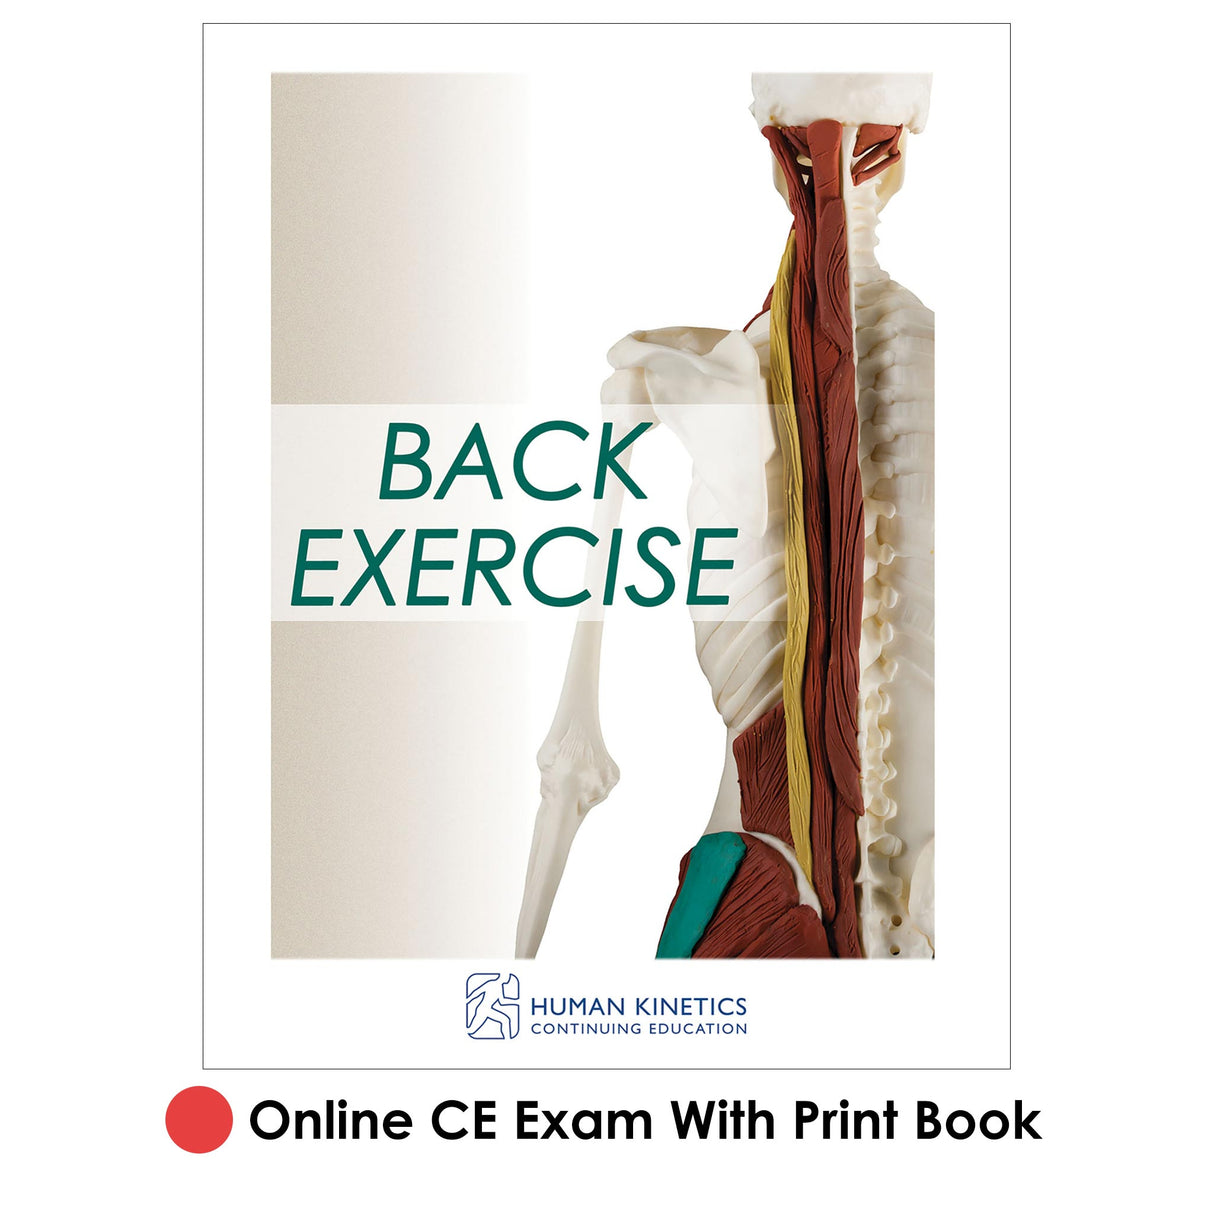 Back Exercise Online CE Exam With Print Book